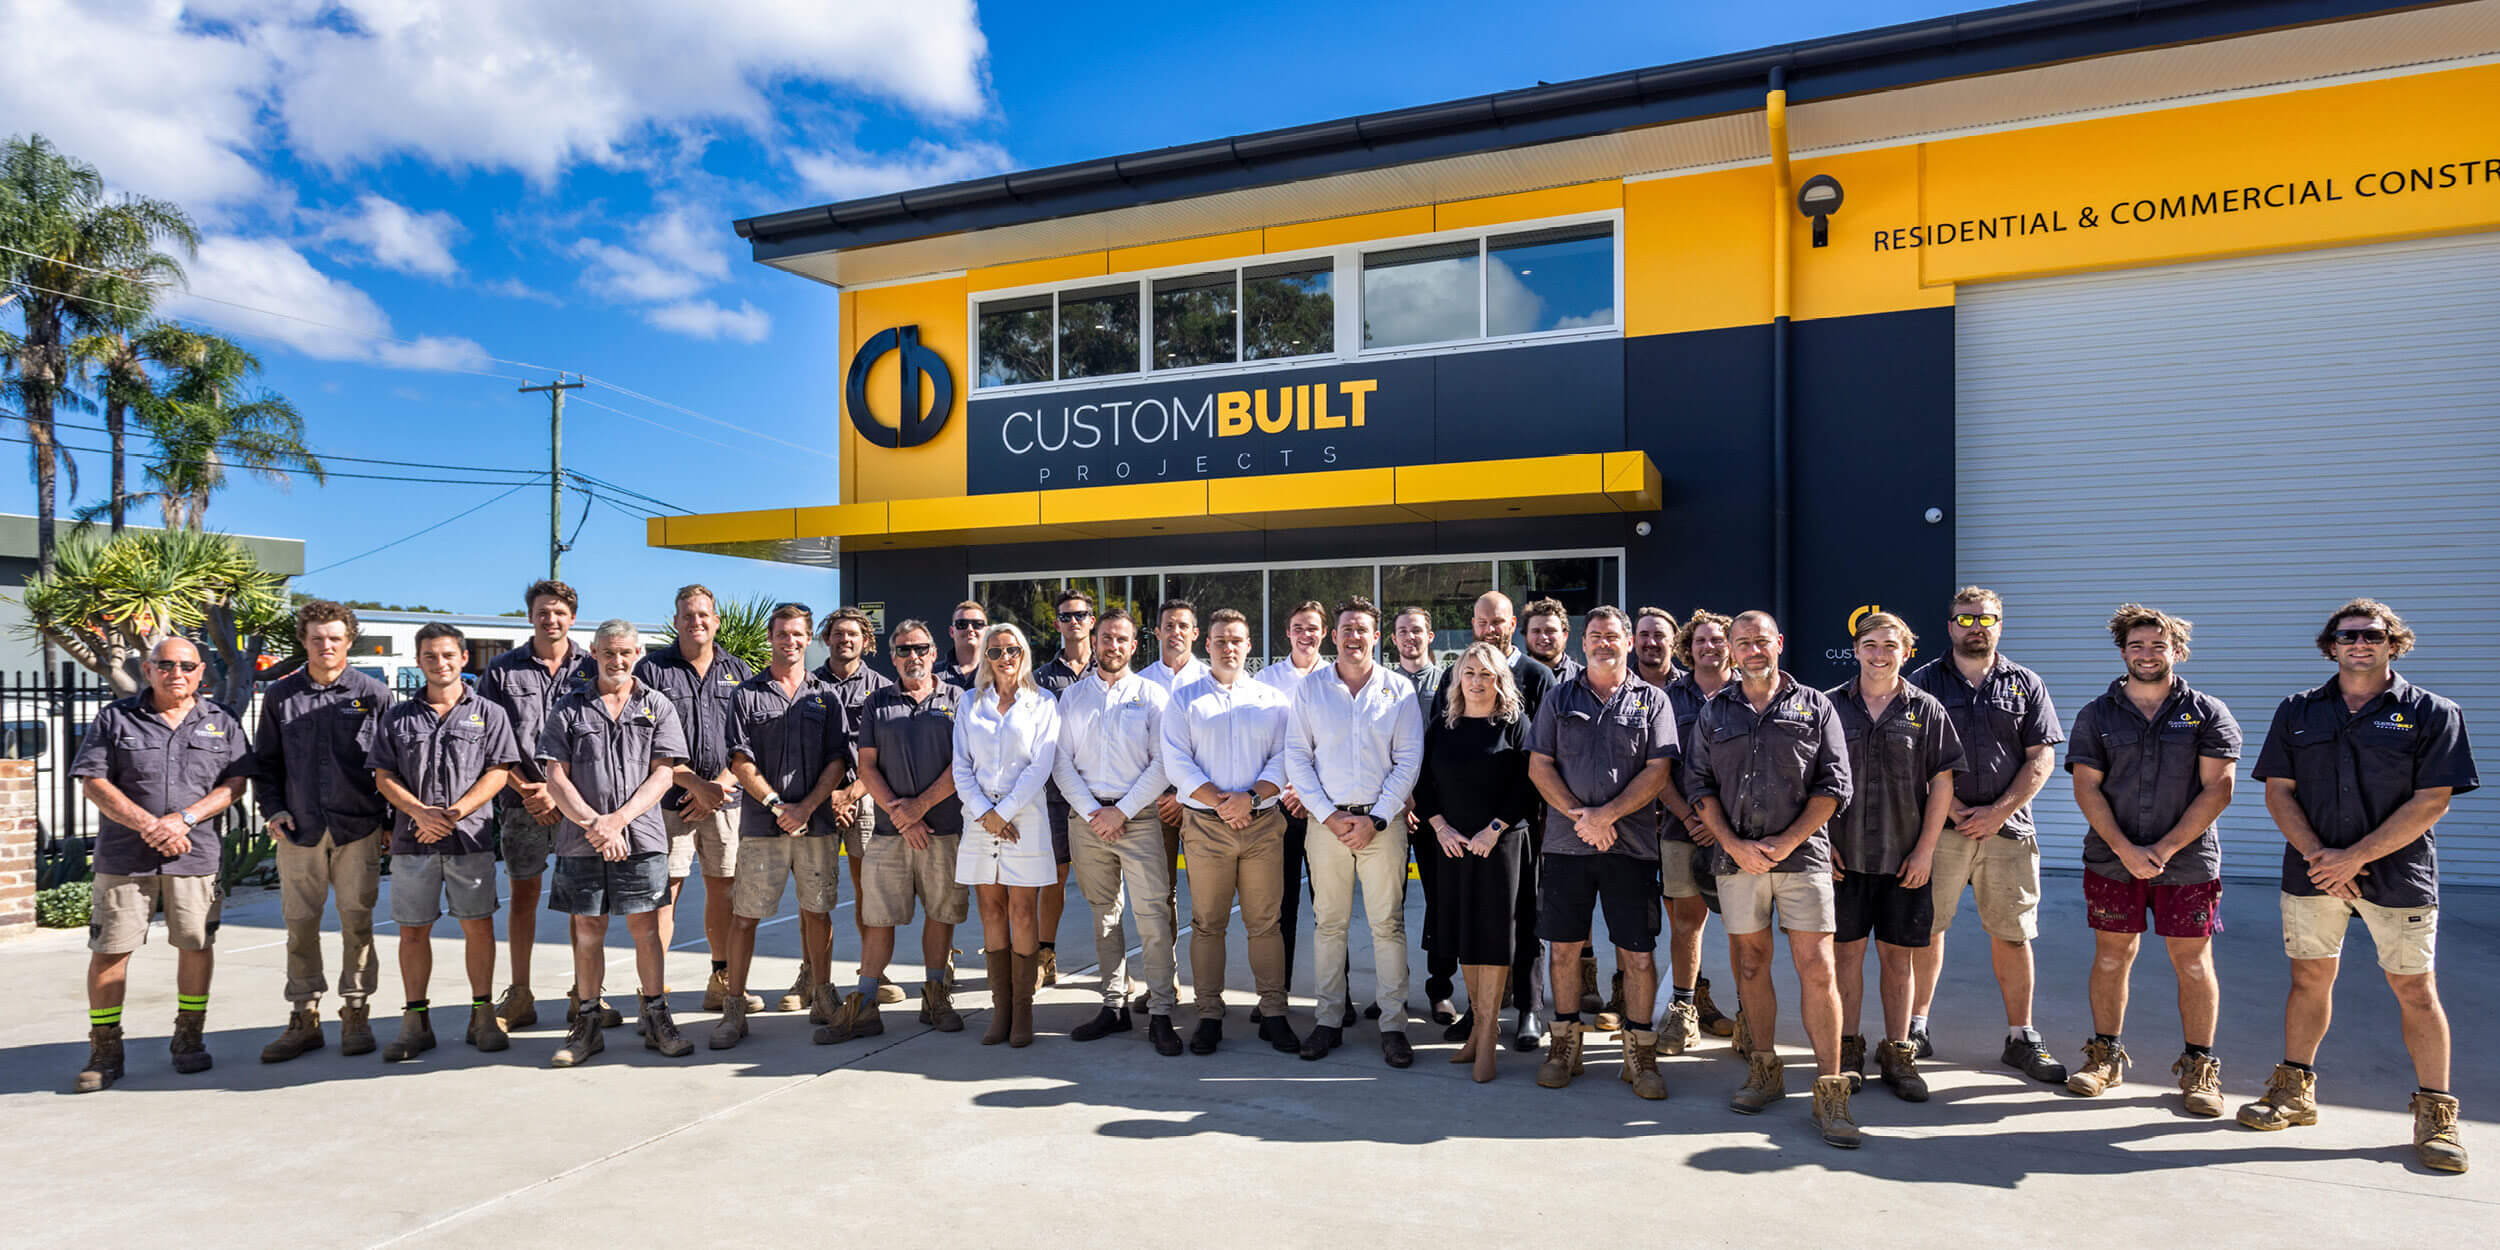 A group of approximately 20 construction workers in uniform, along with business professionals, stand in front of a building in Port Stephens with a sign reading "custom built projects," featuring industrial and office sections.